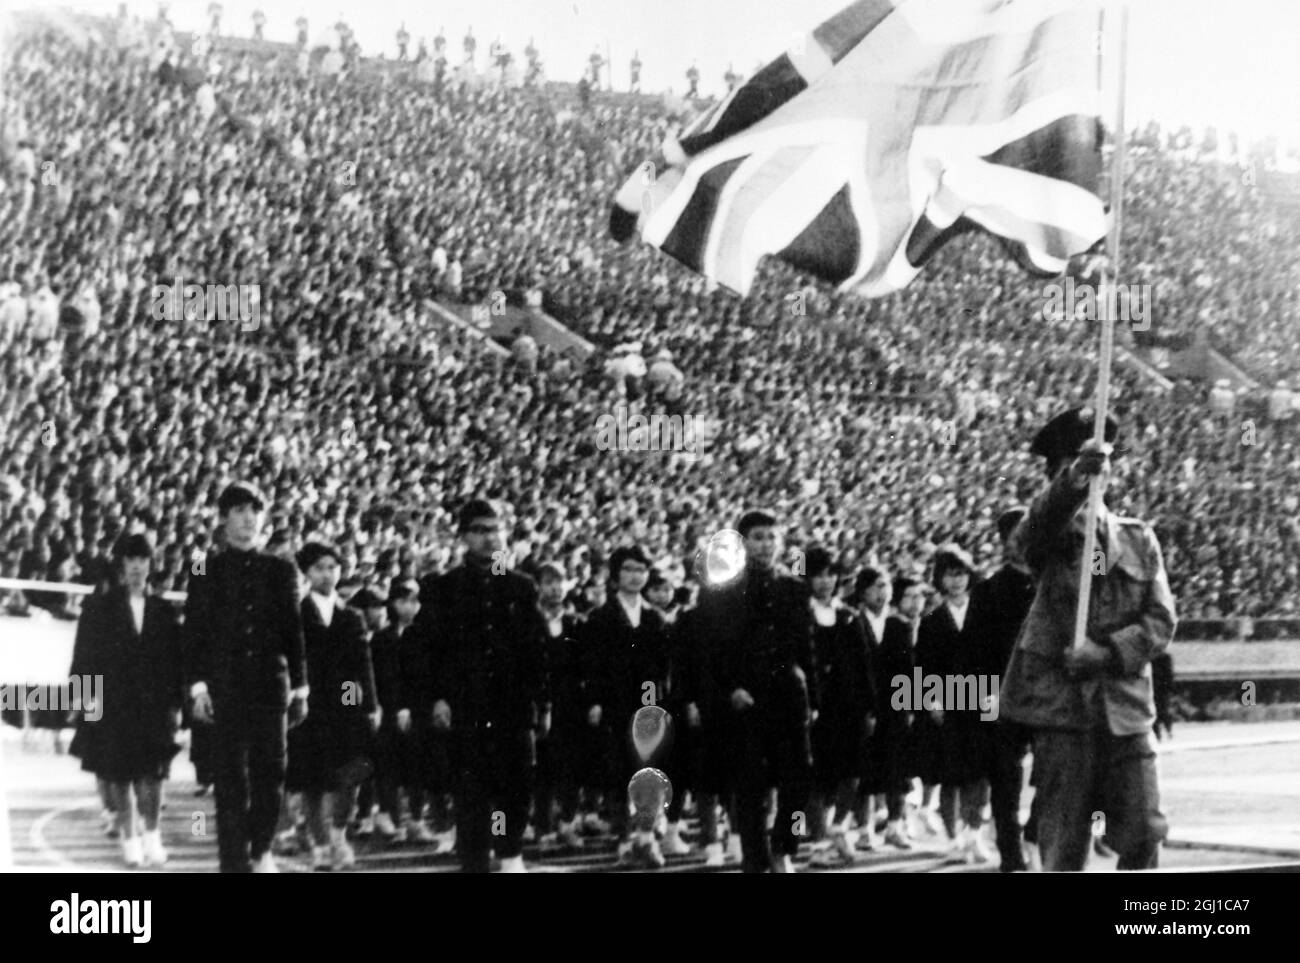 OLYMPICS, OLYMPIC SPORT GAMES - THE XVIII 18TH OLYMPIAD IN TOKYO, JAPAN - JAPANESE STANDARD BEARER CARRIES UNION JACK LED CHILDREN ; 3 OCTOBER 1964 Stock Photo